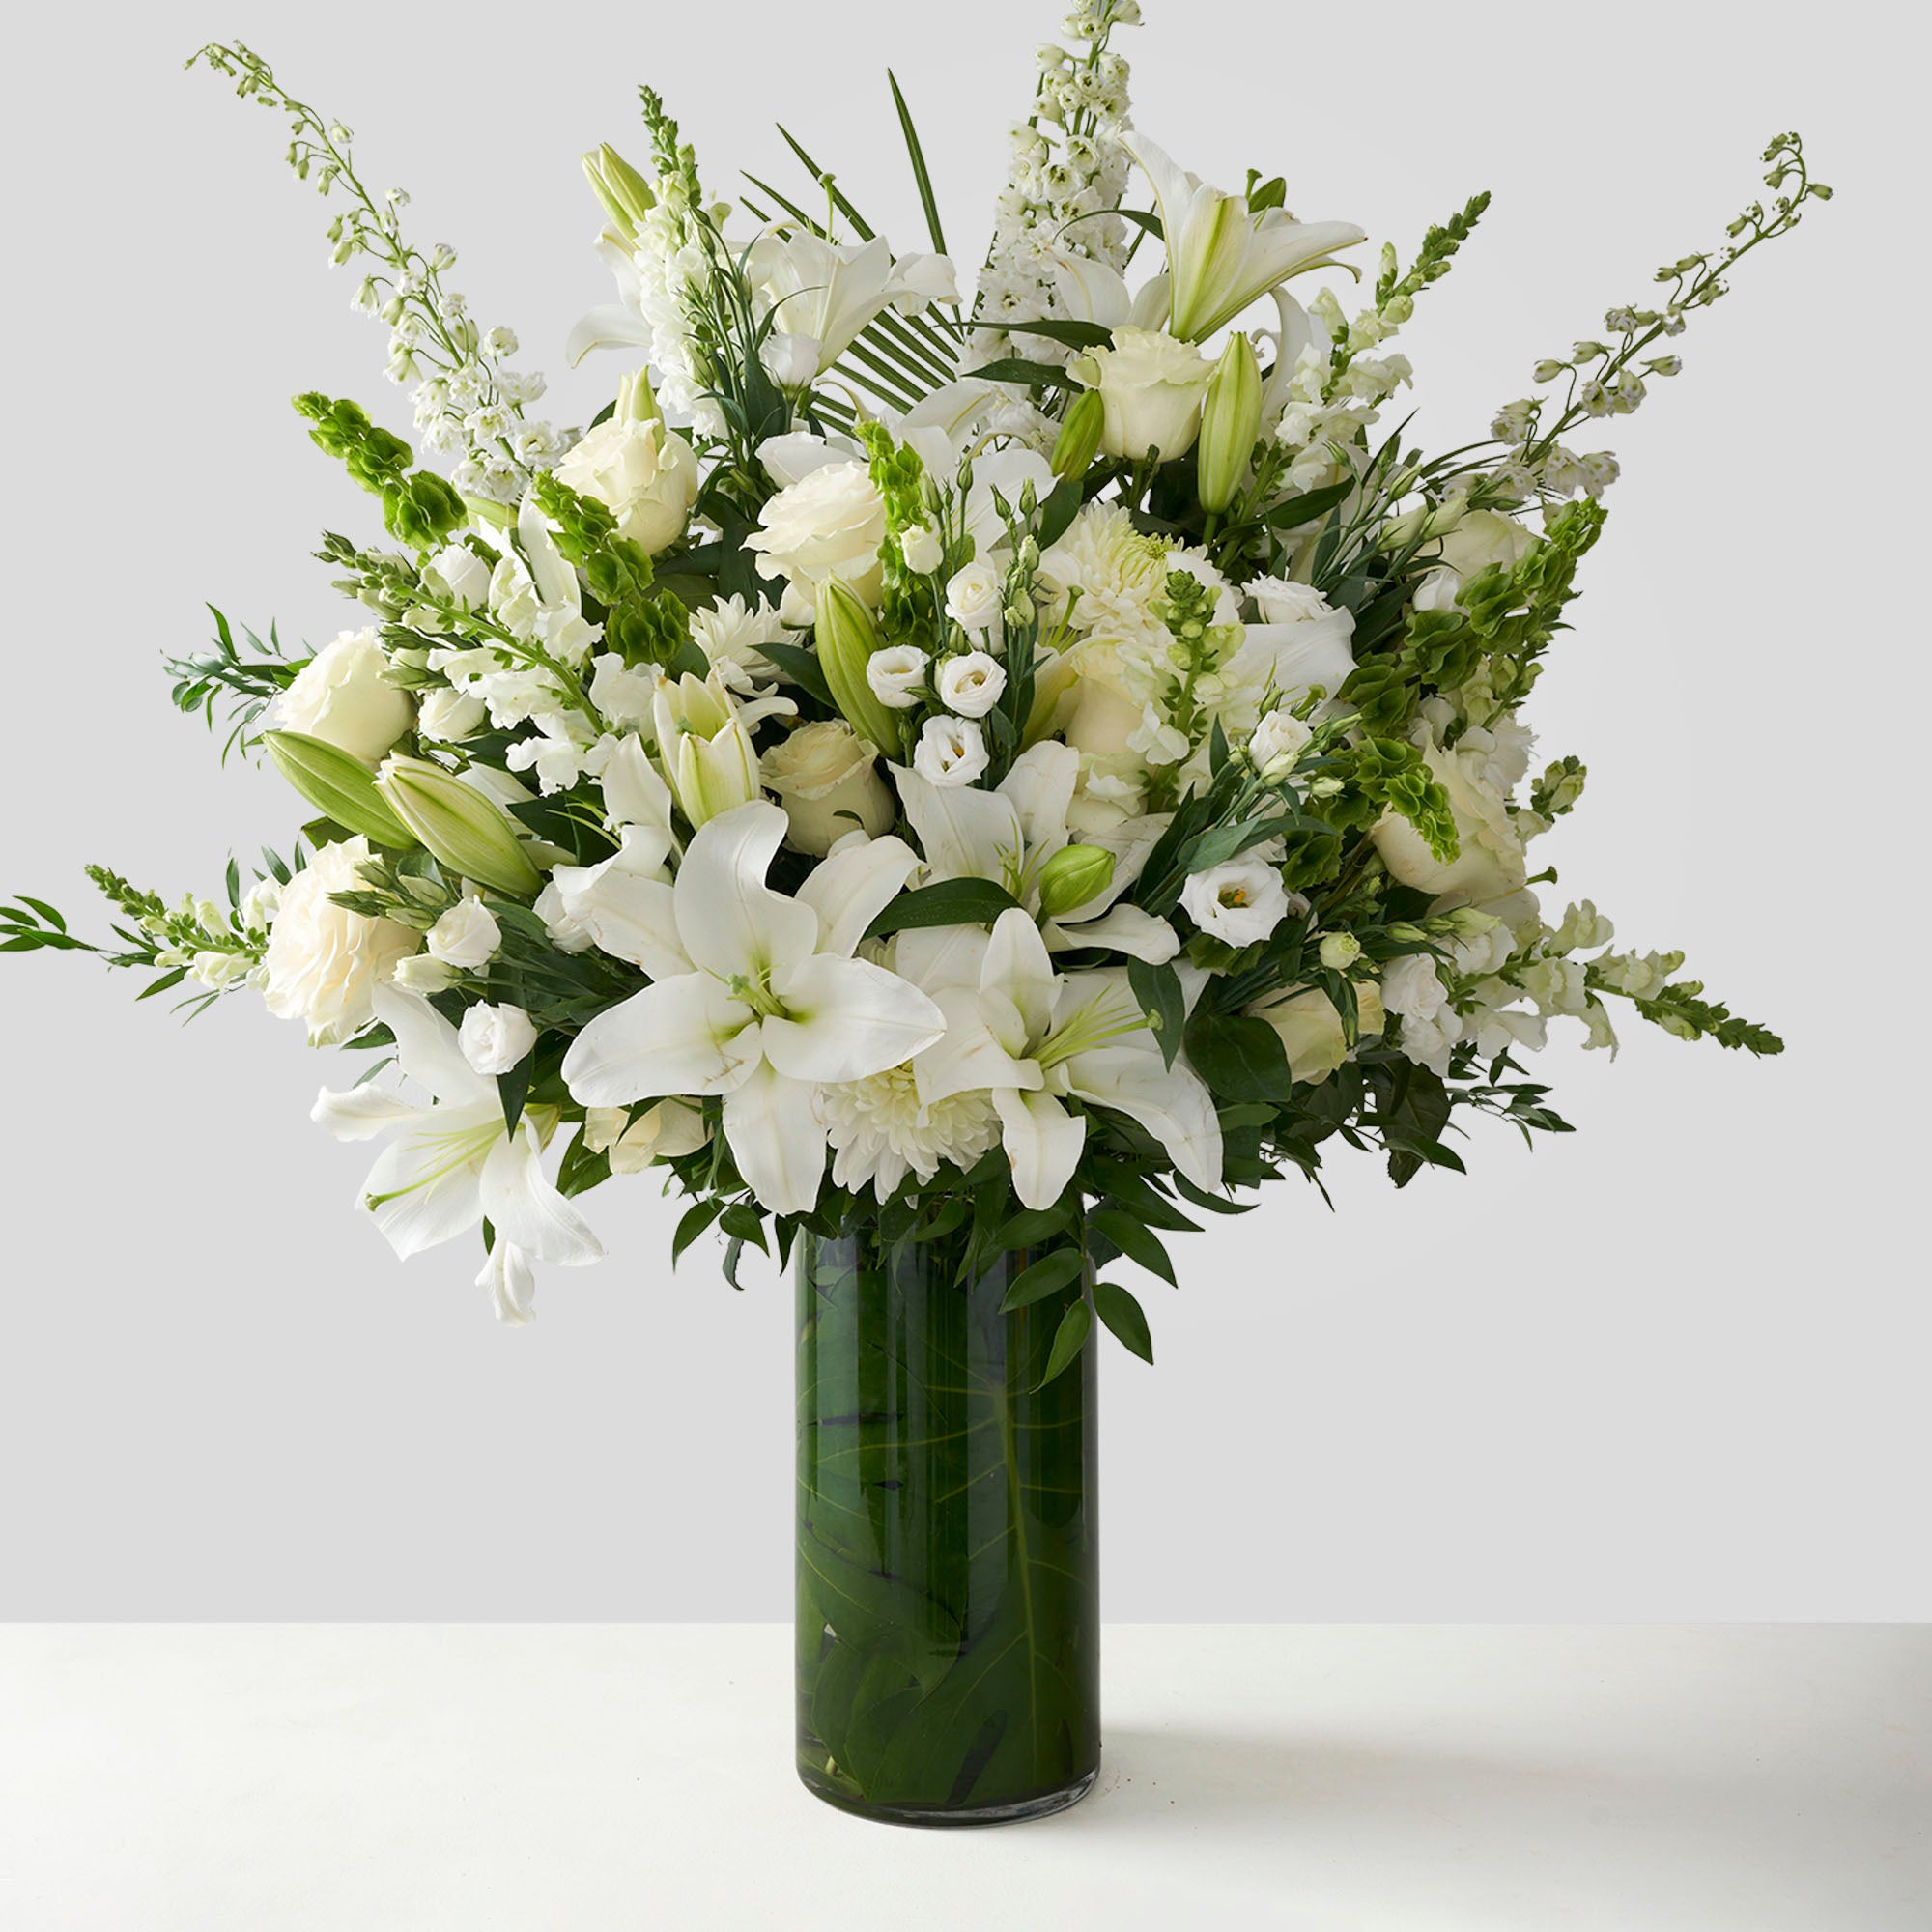 Large glass vase full of white flowers including delphinium, roses, lisianthus and lilies.